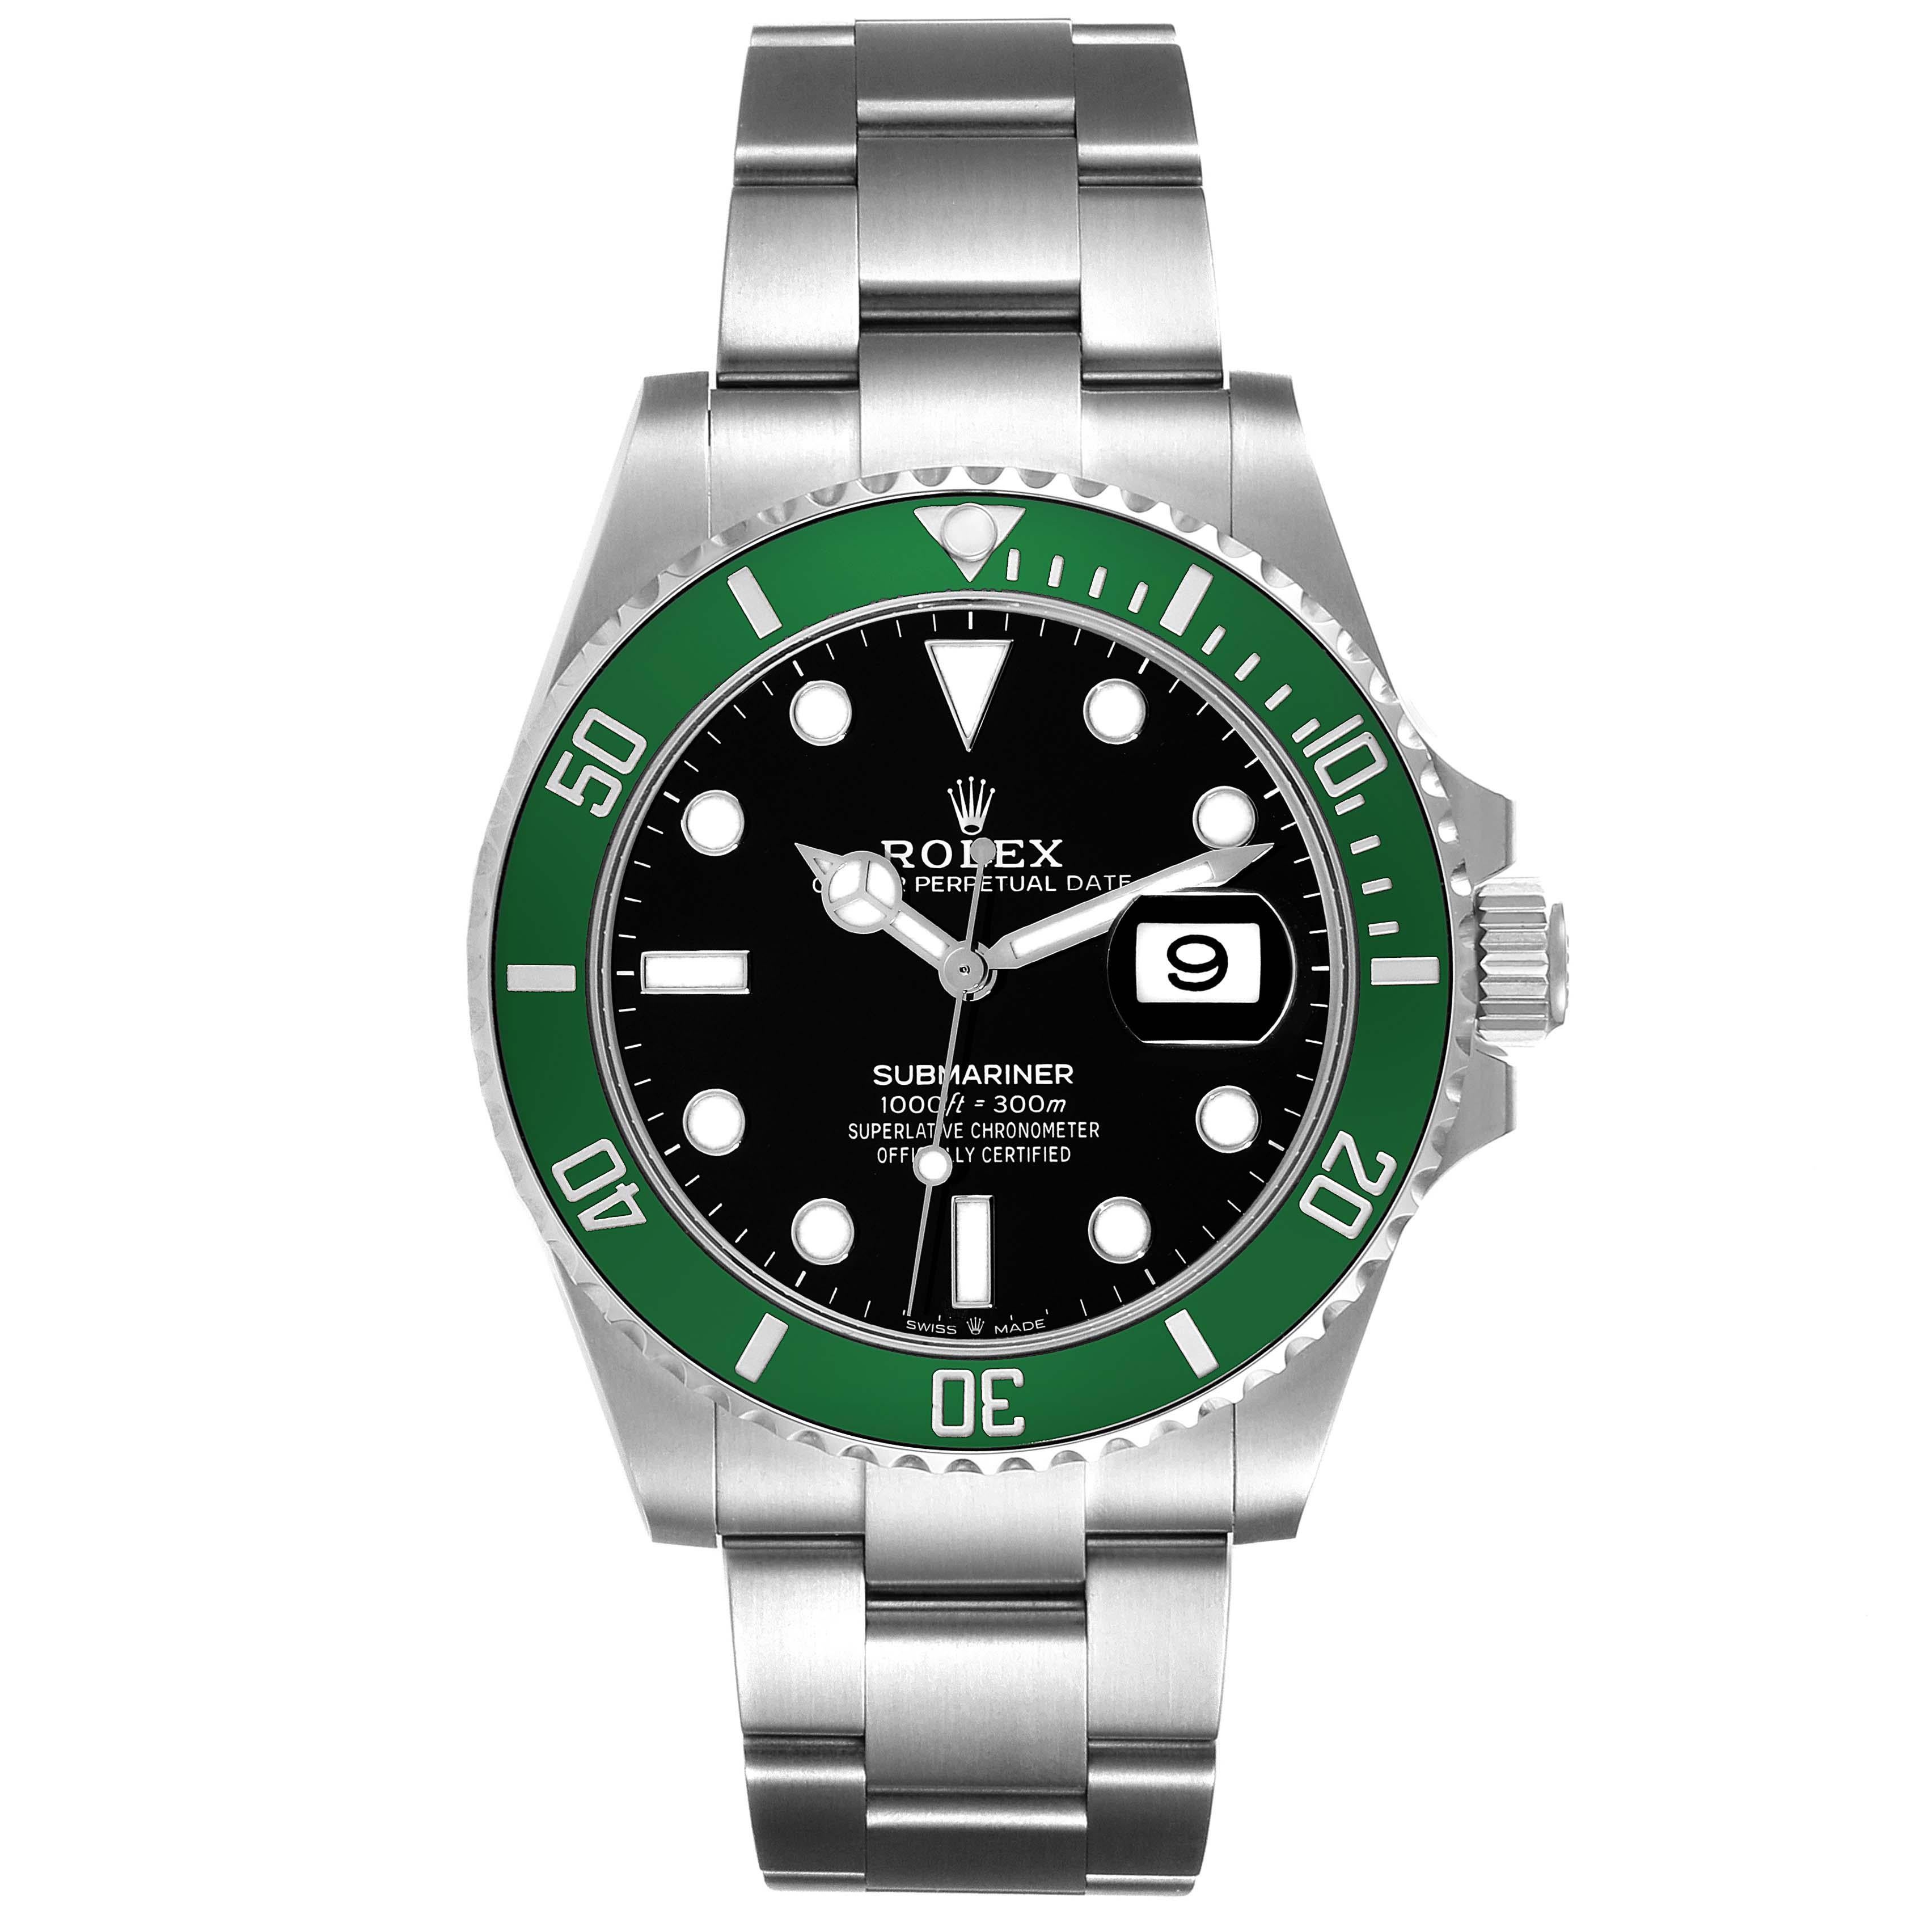 Rolex Submariner Starbucks Green Ceramic Bezel Steel Mens Watch 126610LV Box Card. Officially certified chronometer automatic self-winding movement. High-performance Paraflex shock absorbers. Stainless steel oyster case 41 mm in diameter. Rolex logo